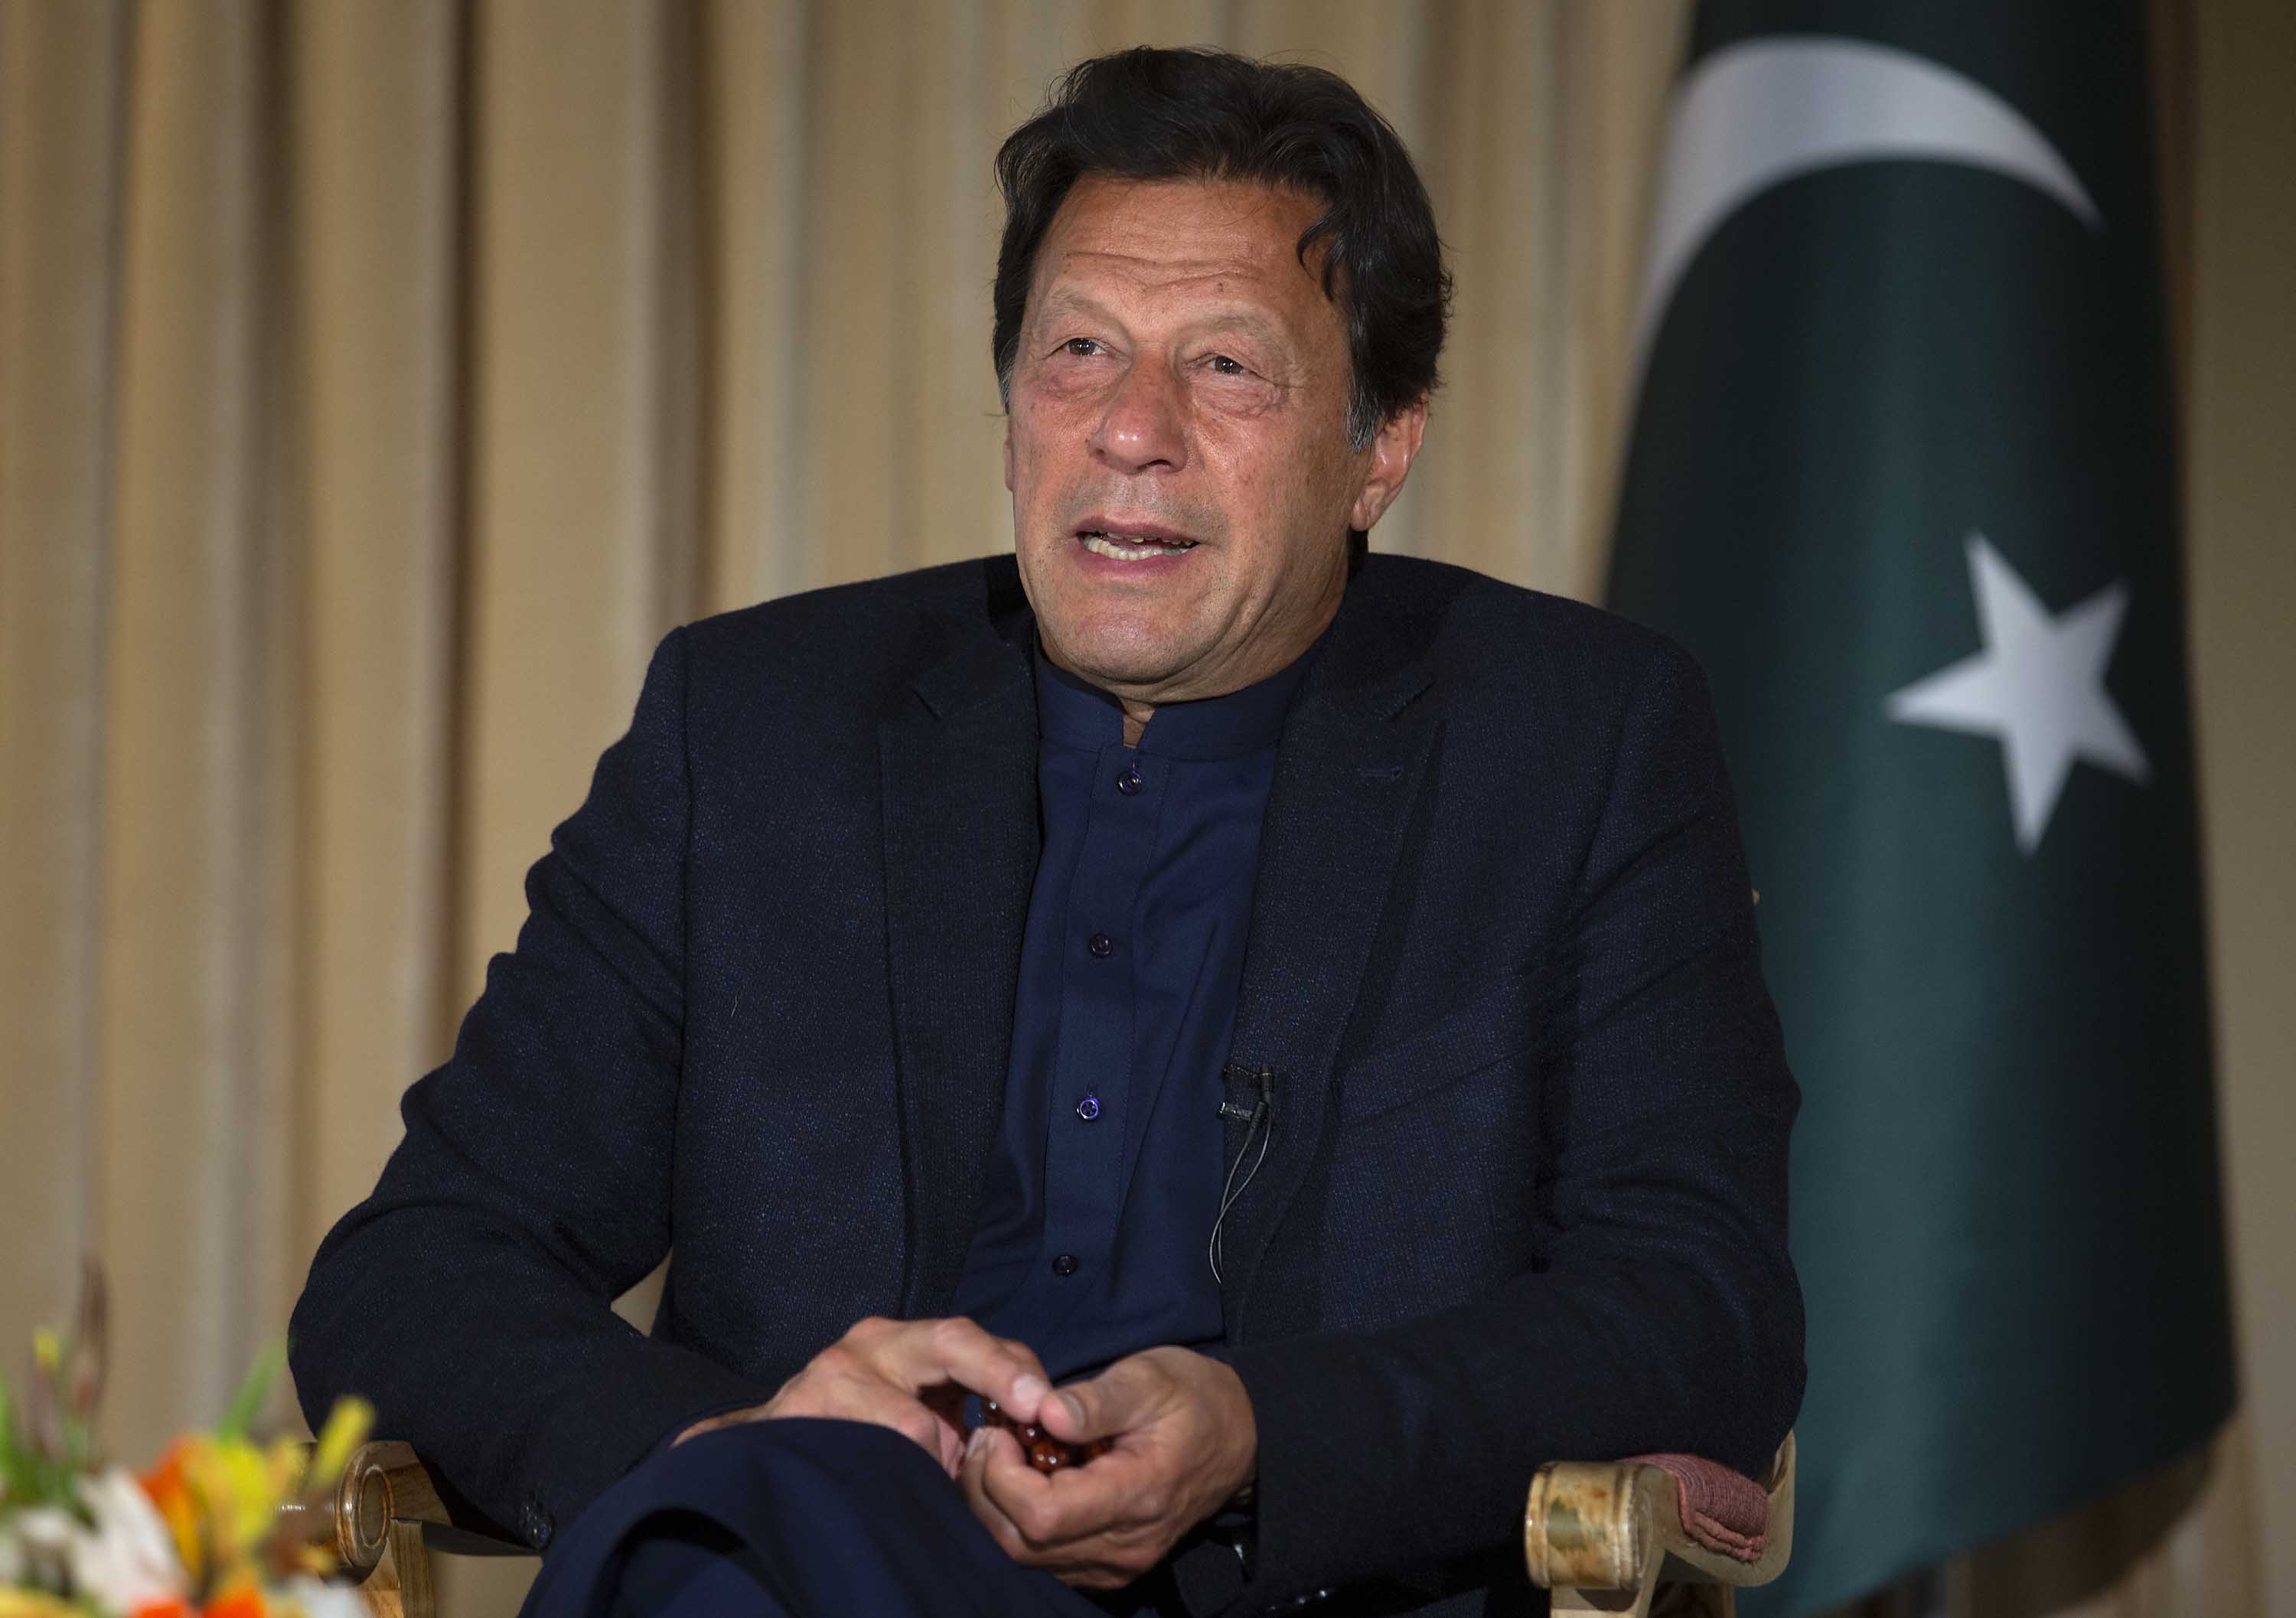 Pakistan's Prime Minister Imran Khan speaks during an interview with The Associated Press, in Islamabad, Pakistan, on March 16.